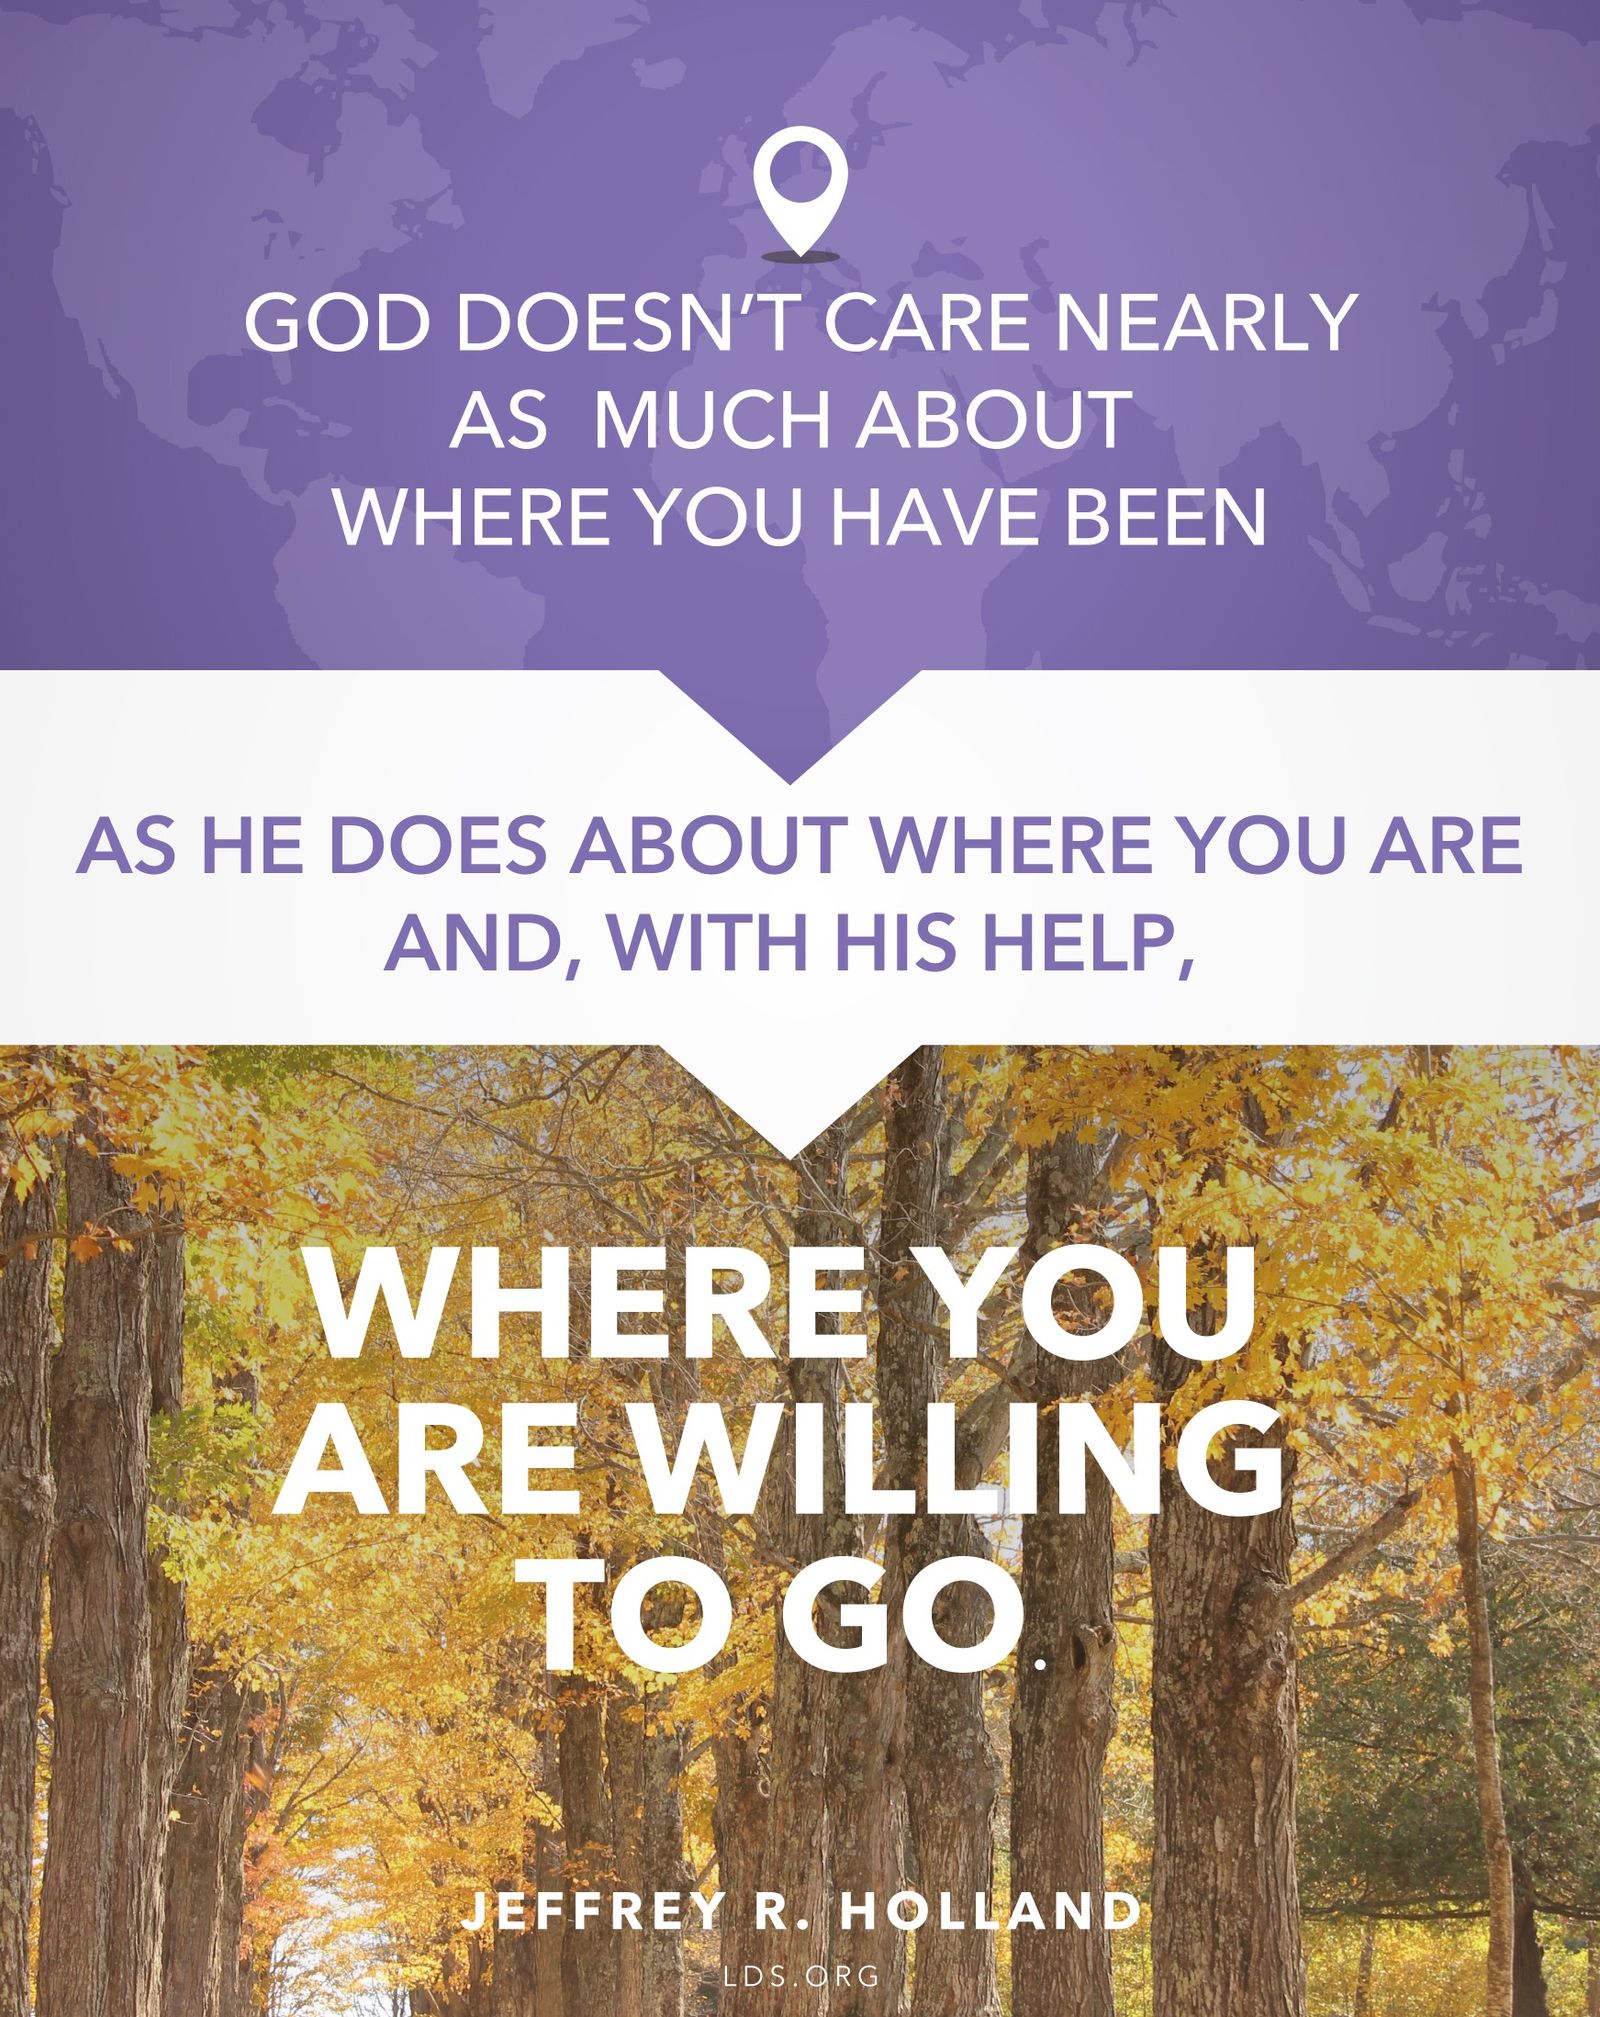 “God doesn’t care nearly as much about where you have been as He does about where you are and, with His help, where you are willing to go.”—Elder Jeffrey R. Holland, “The Best Is Yet to Be” © See Individual Images ipCode 1.